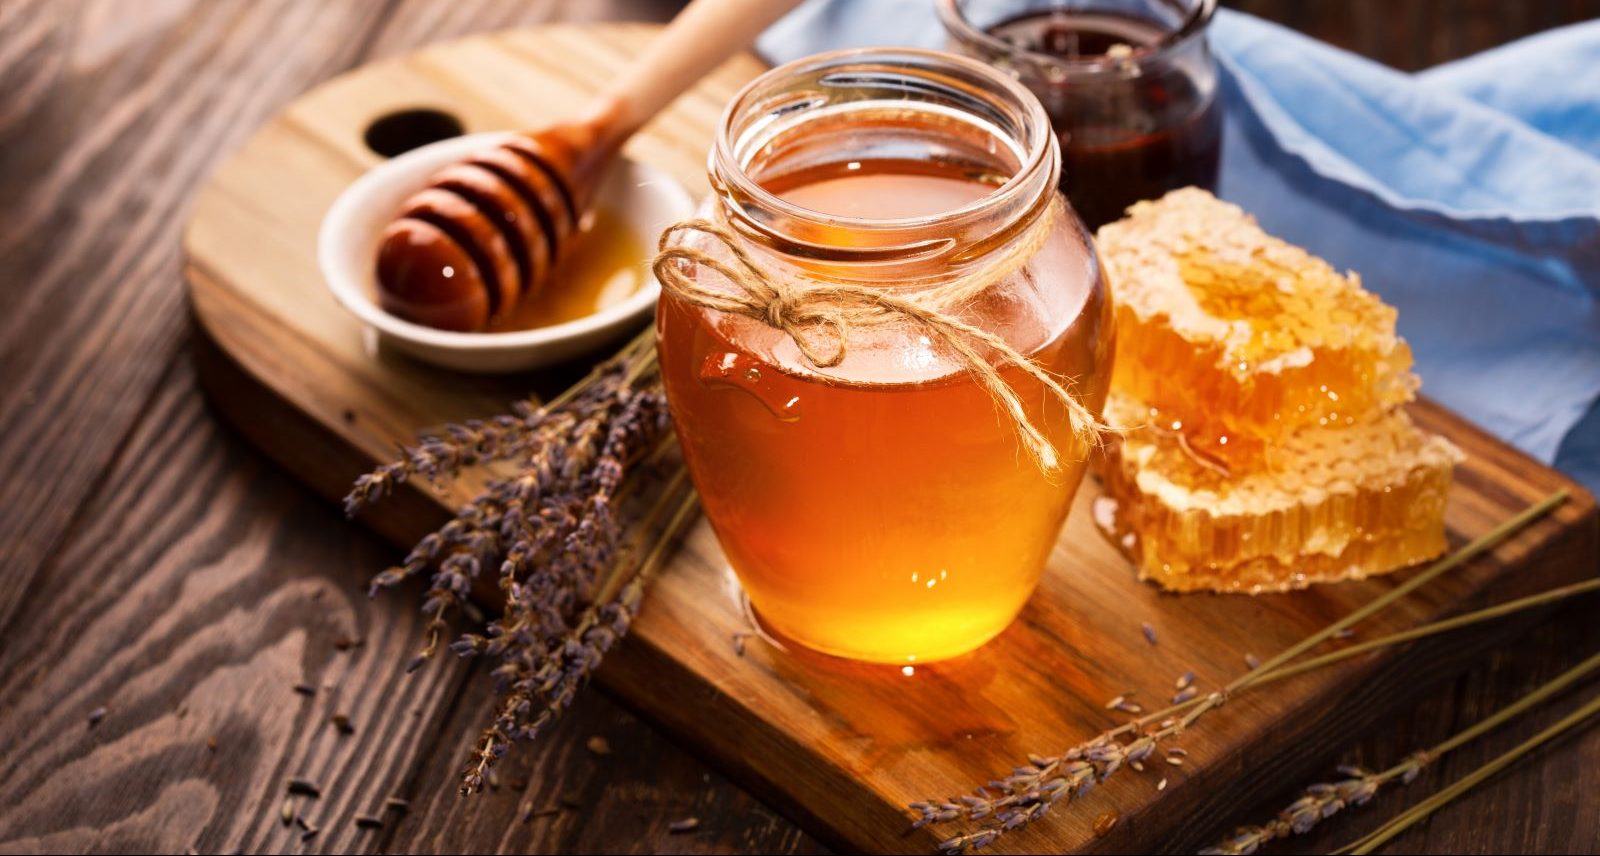 According to new research, honey – especially Robinia, clover and unprocessed raw honey – can improve blood sugar and cholesterol levels.